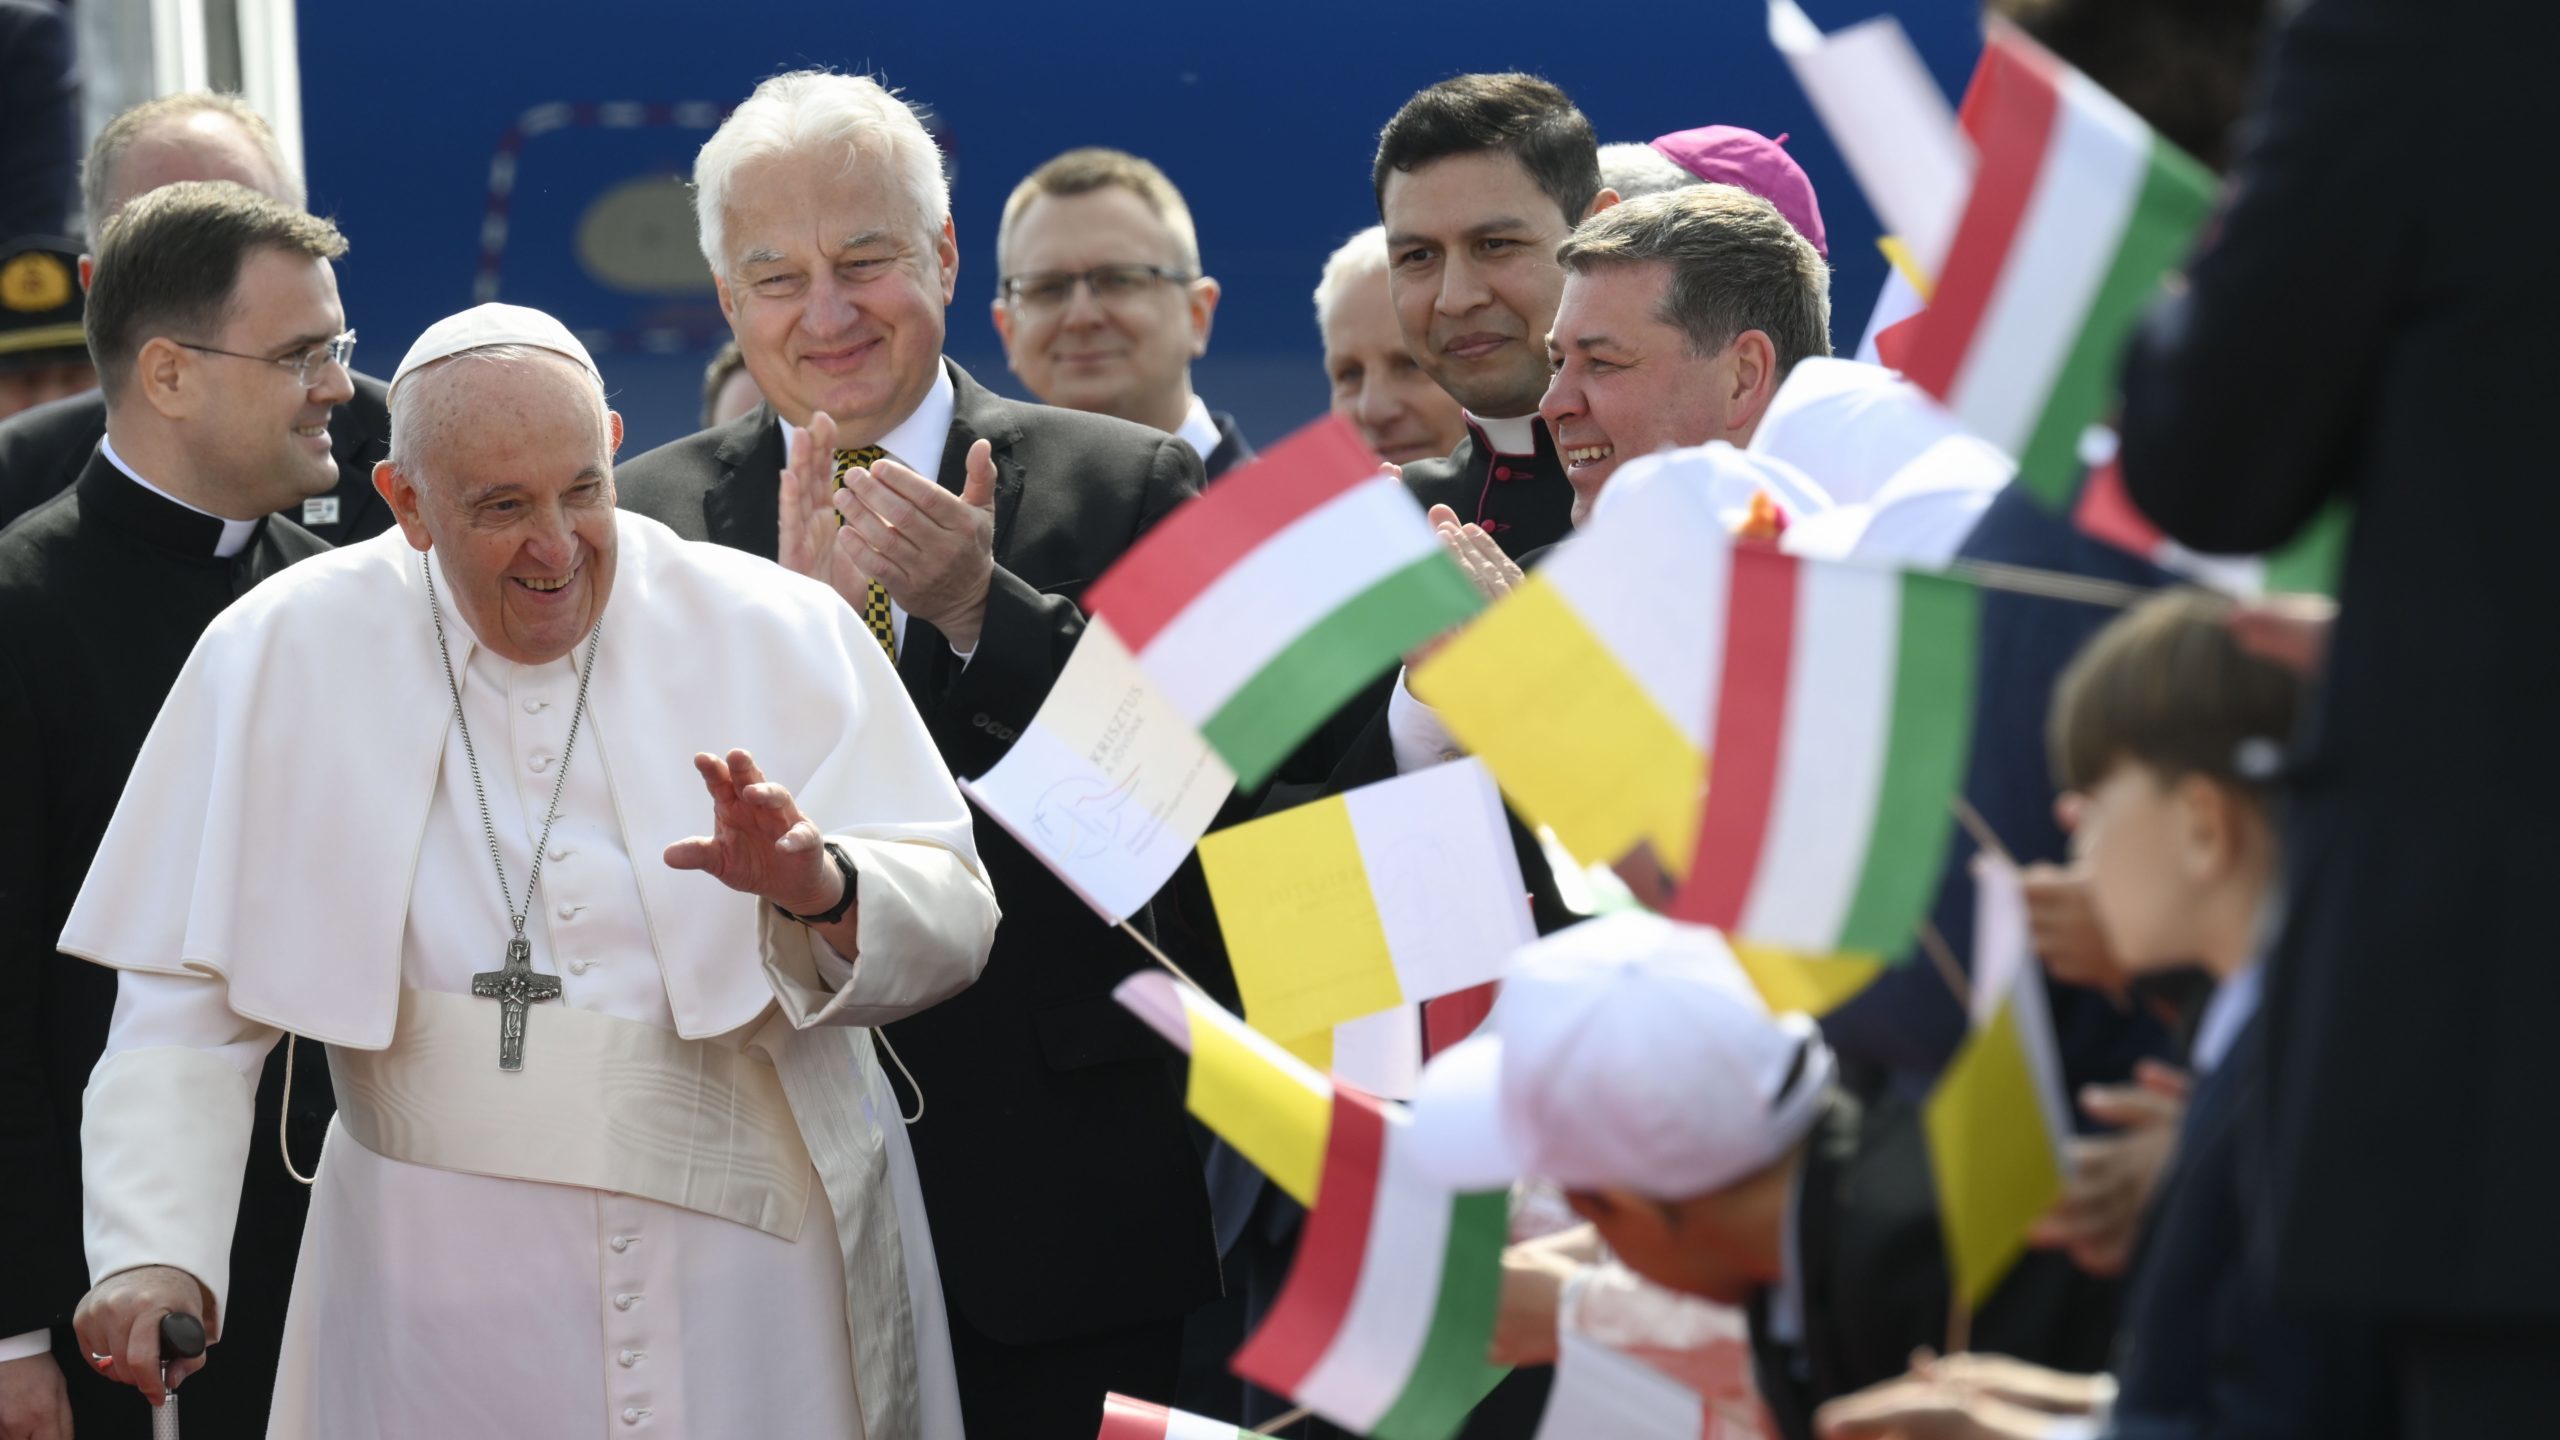 Pope arrives in Hungary preaching cooperation and